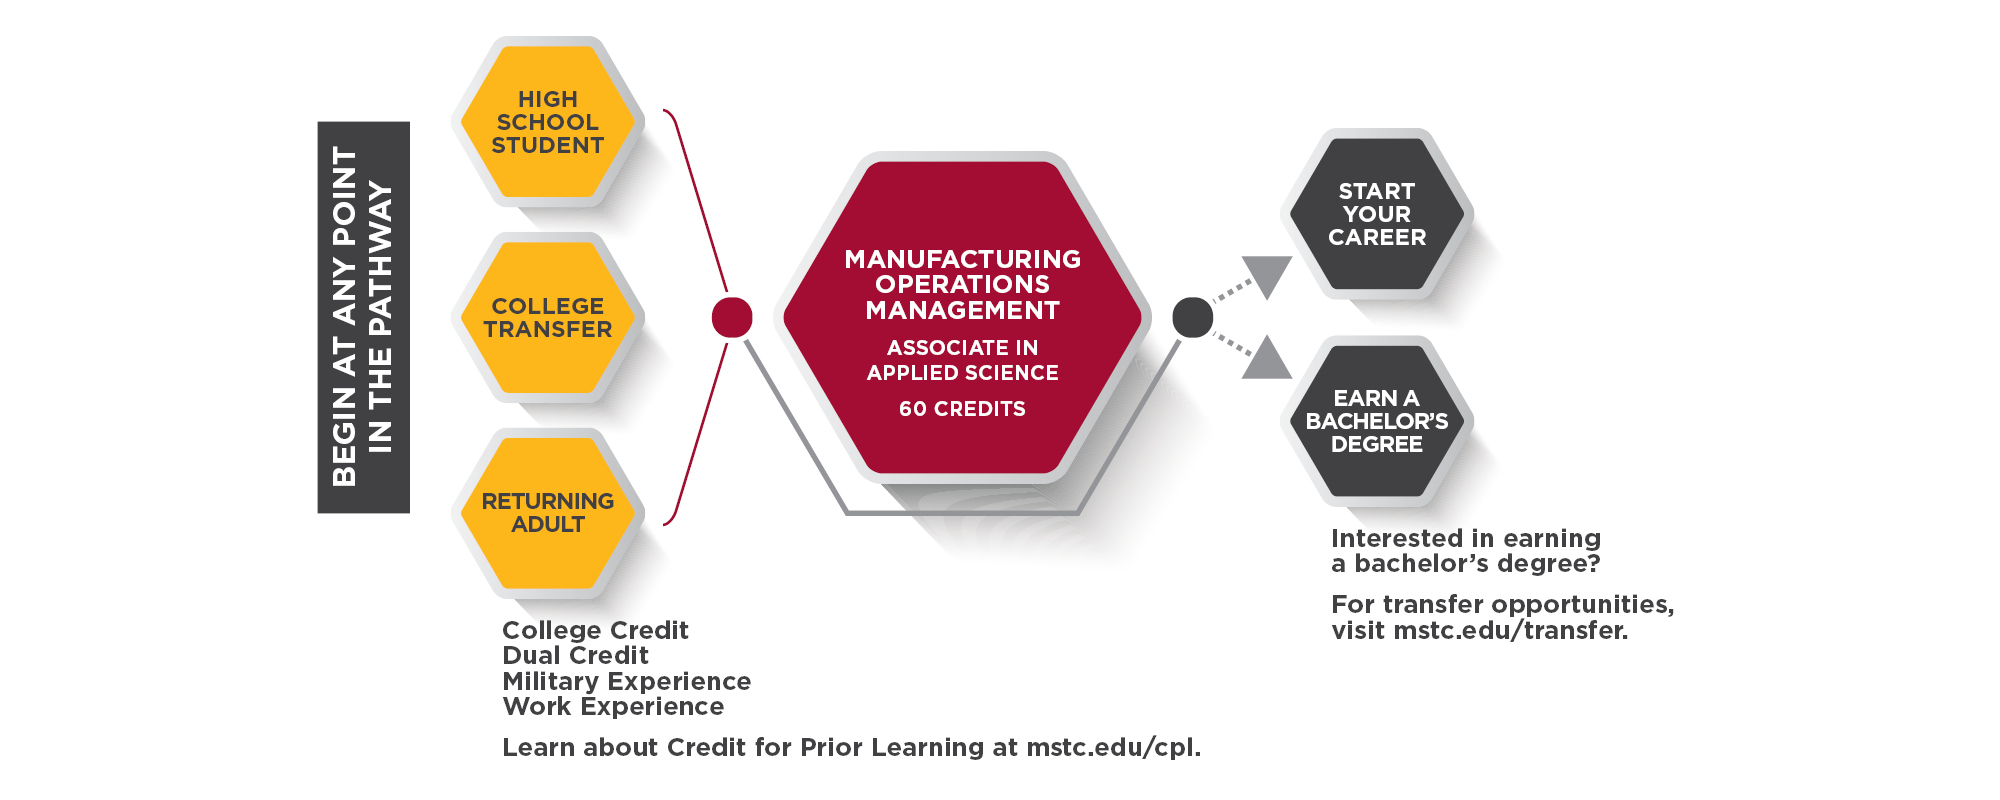 Manufacturing Operations Management Program Pathway